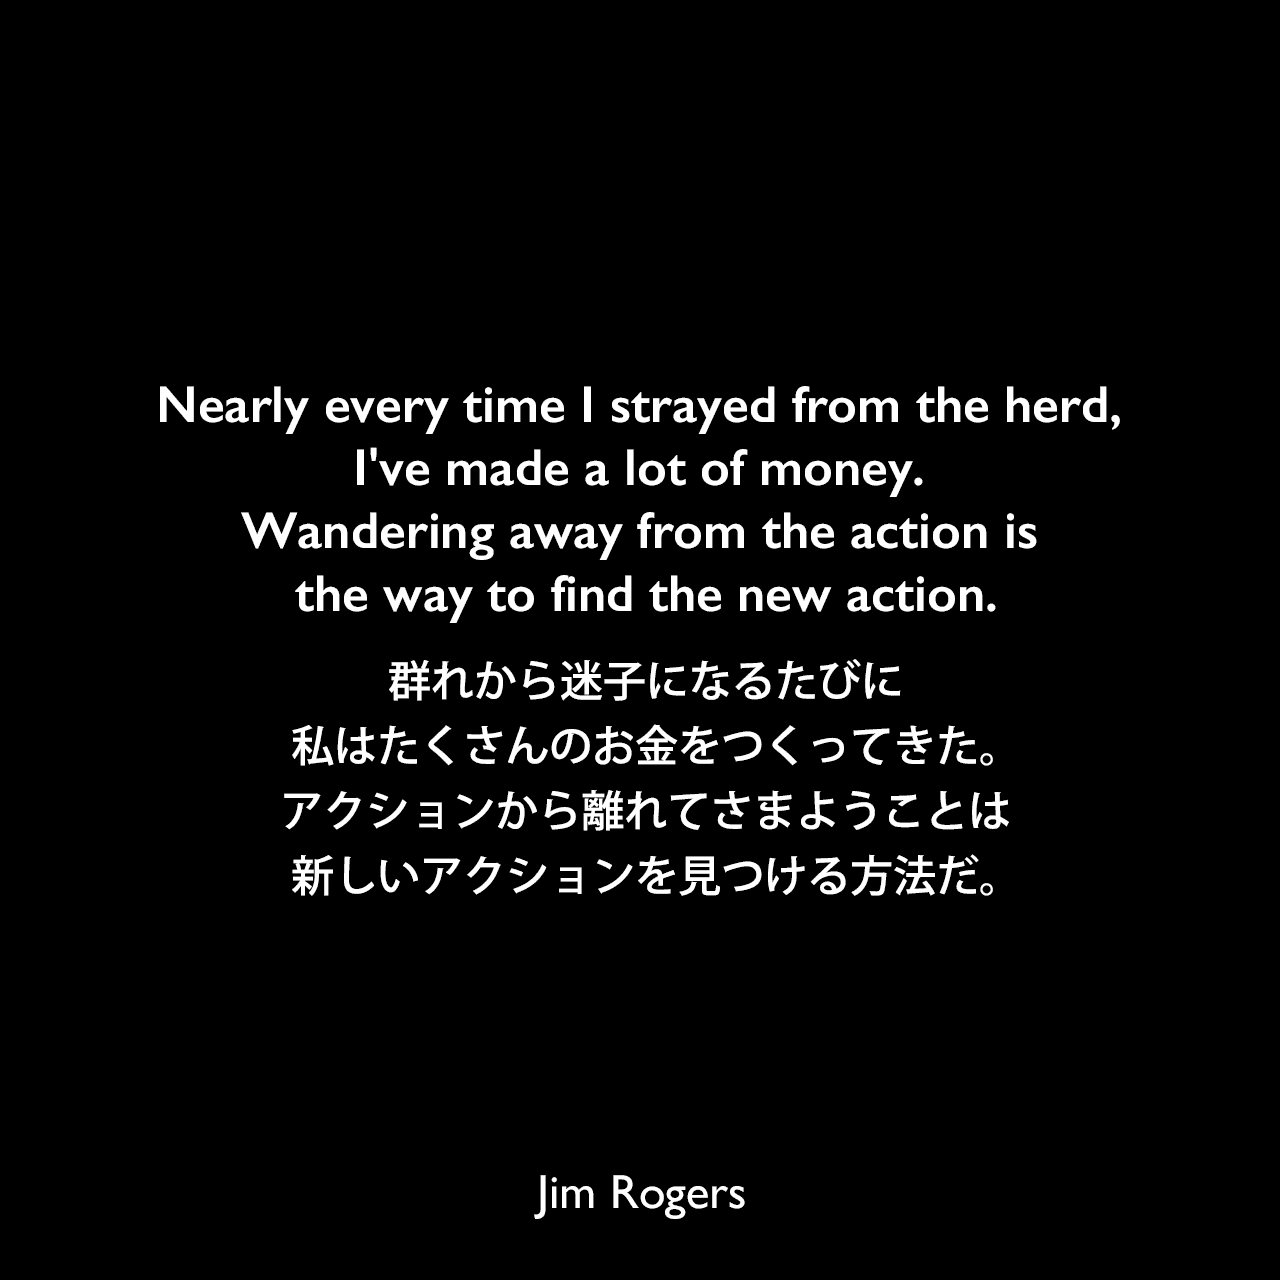 Nearly every time I strayed from the herd, I've made a lot of money. Wandering away from the action is the way to find the new action.群れから迷子になるたびに、私はたくさんのお金をつくってきた。アクションから離れてさまようことは、新しいアクションを見つける方法だ。Jim Rogers